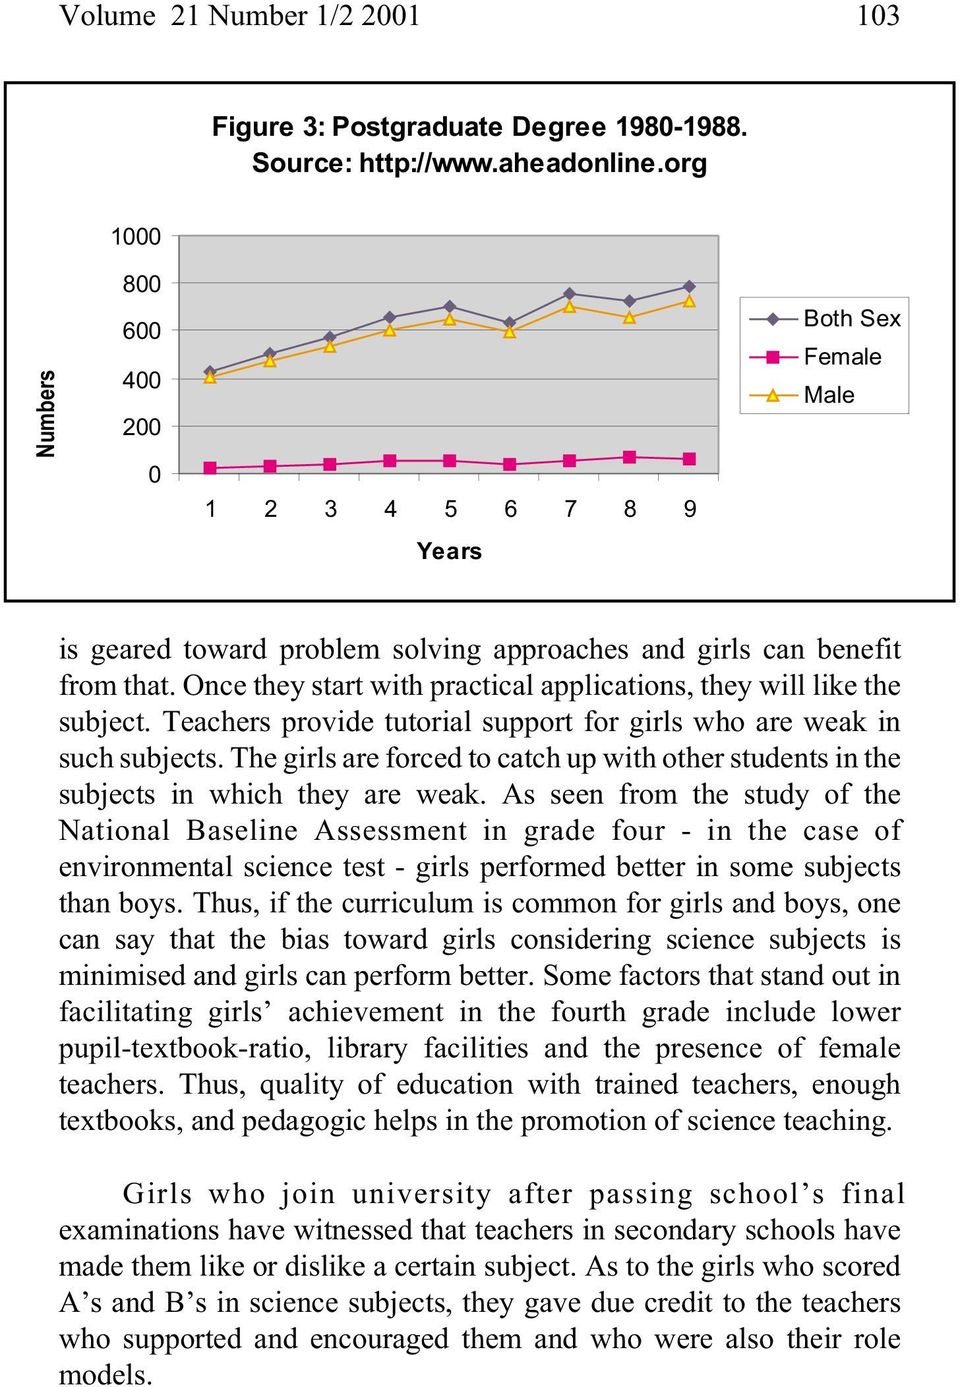 Once they start with practical applications, they will like the subject. Teachers provide tutorial support for girls who are weak in such subjects.